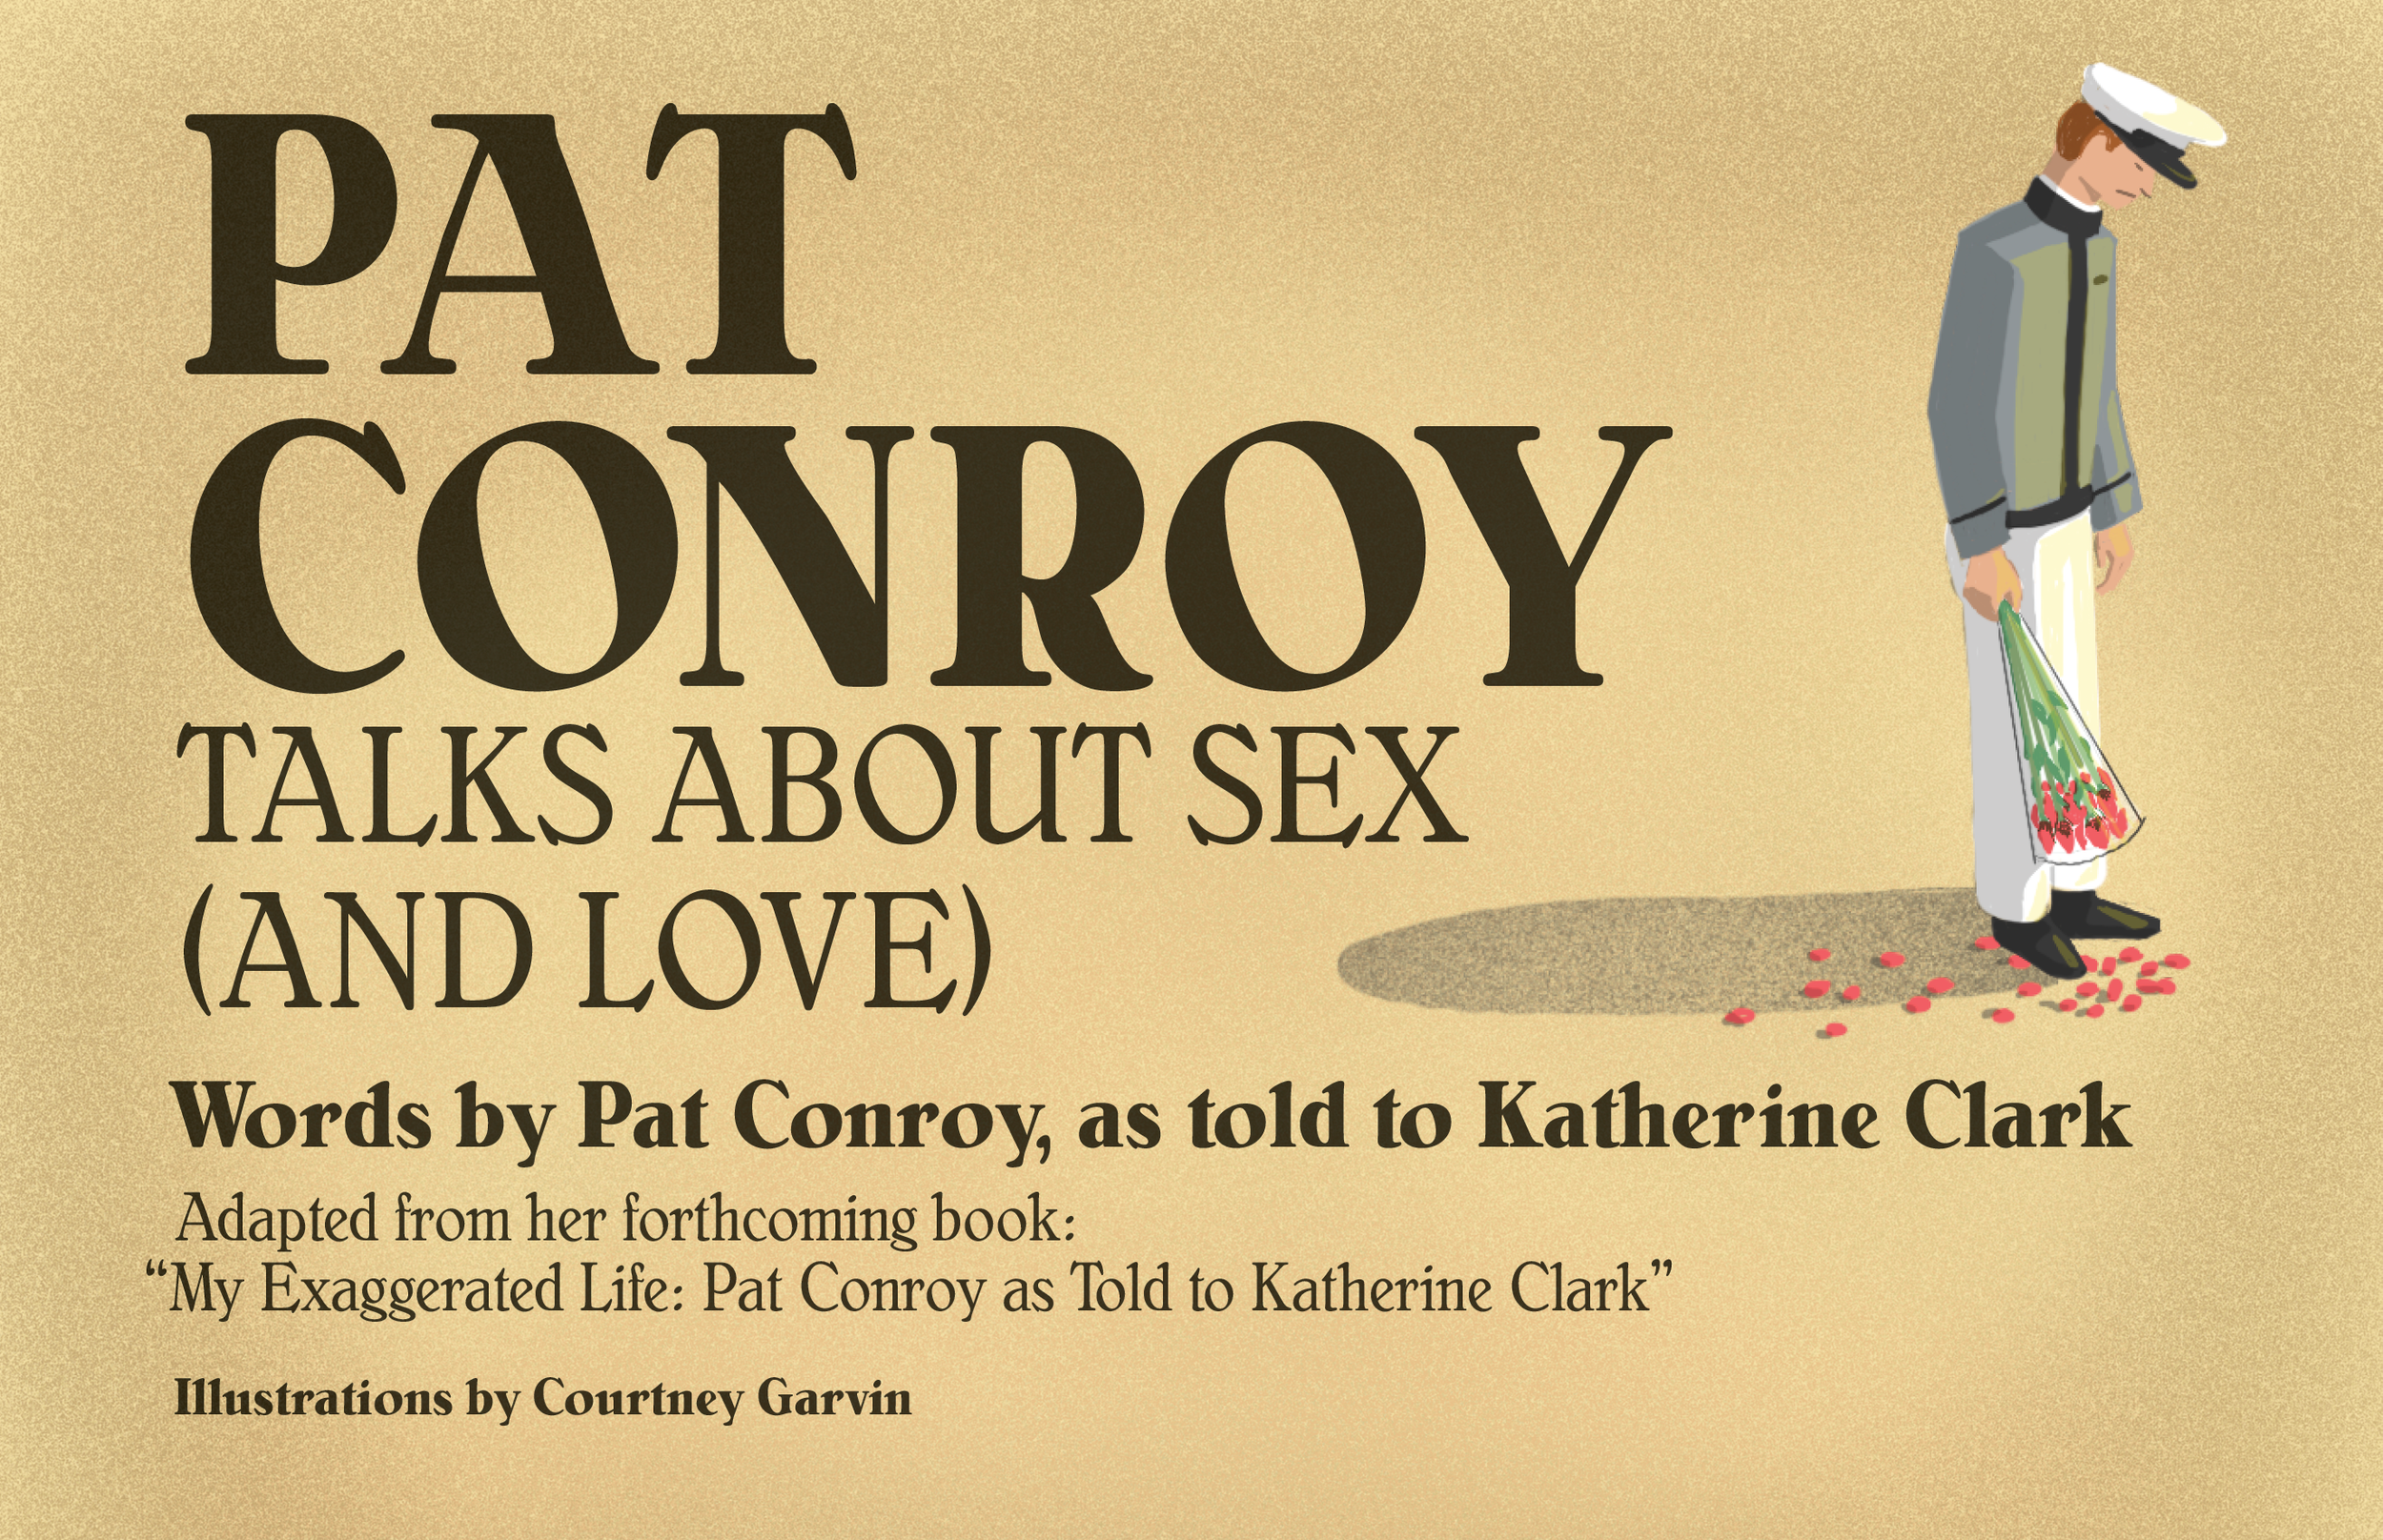 Pat Conroy Talks About Sex (and Love) — THE BITTER SOUTHERNER